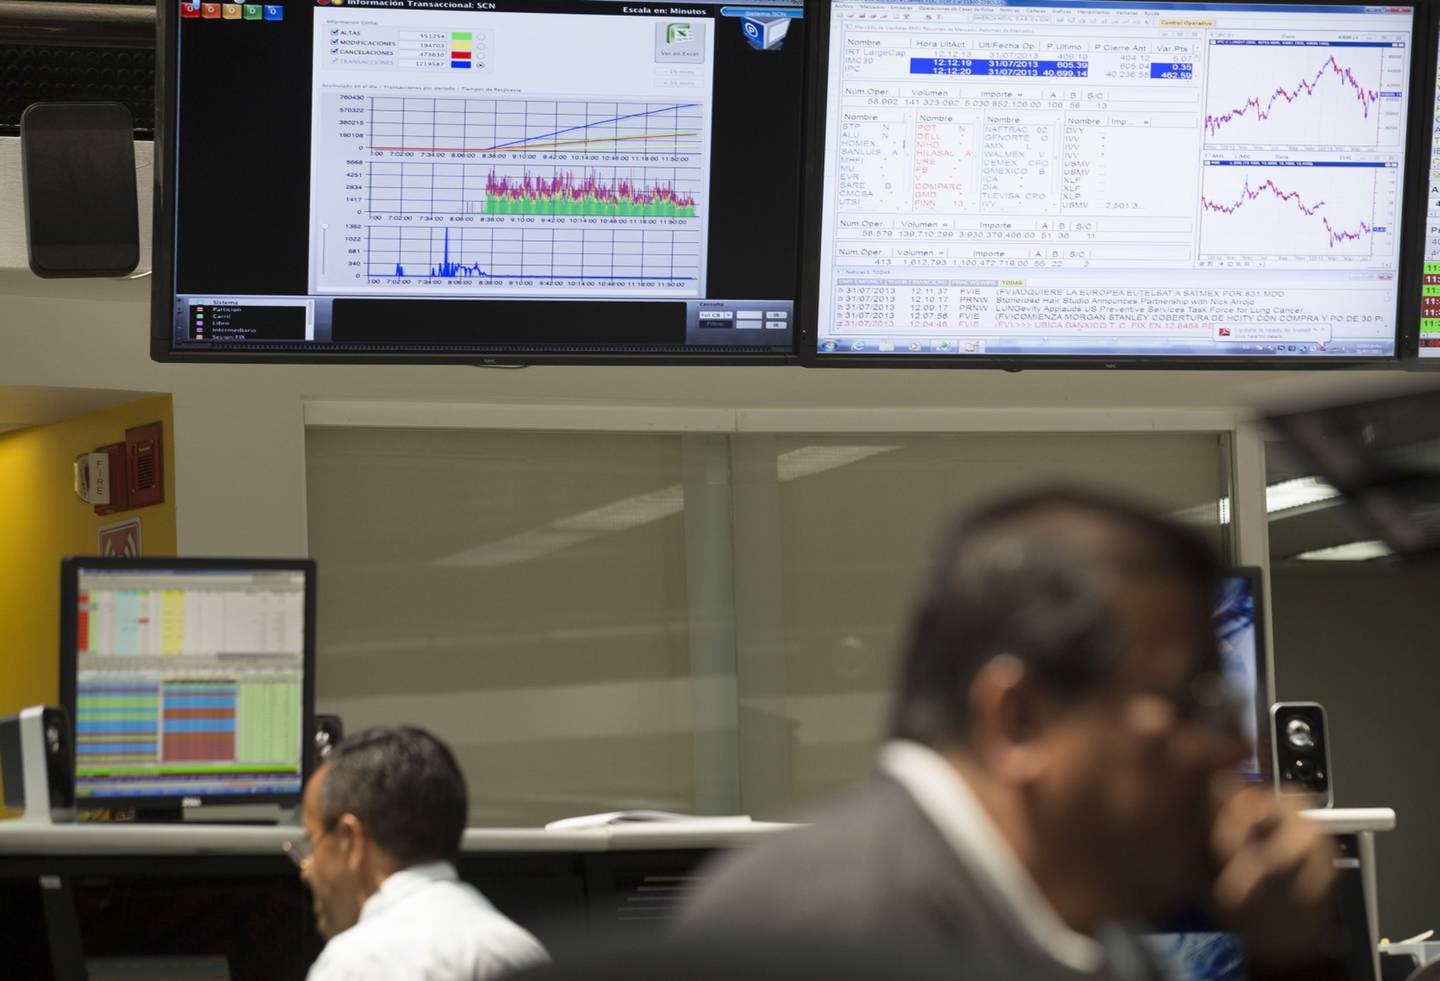 Workers monitor the stock market movement on the trading floor at the Bolsa Mexicana de Valores (BMV), Mexico's stock exchange, in Mexico City. Photographer: Susana Gonzalez/Bloomberg